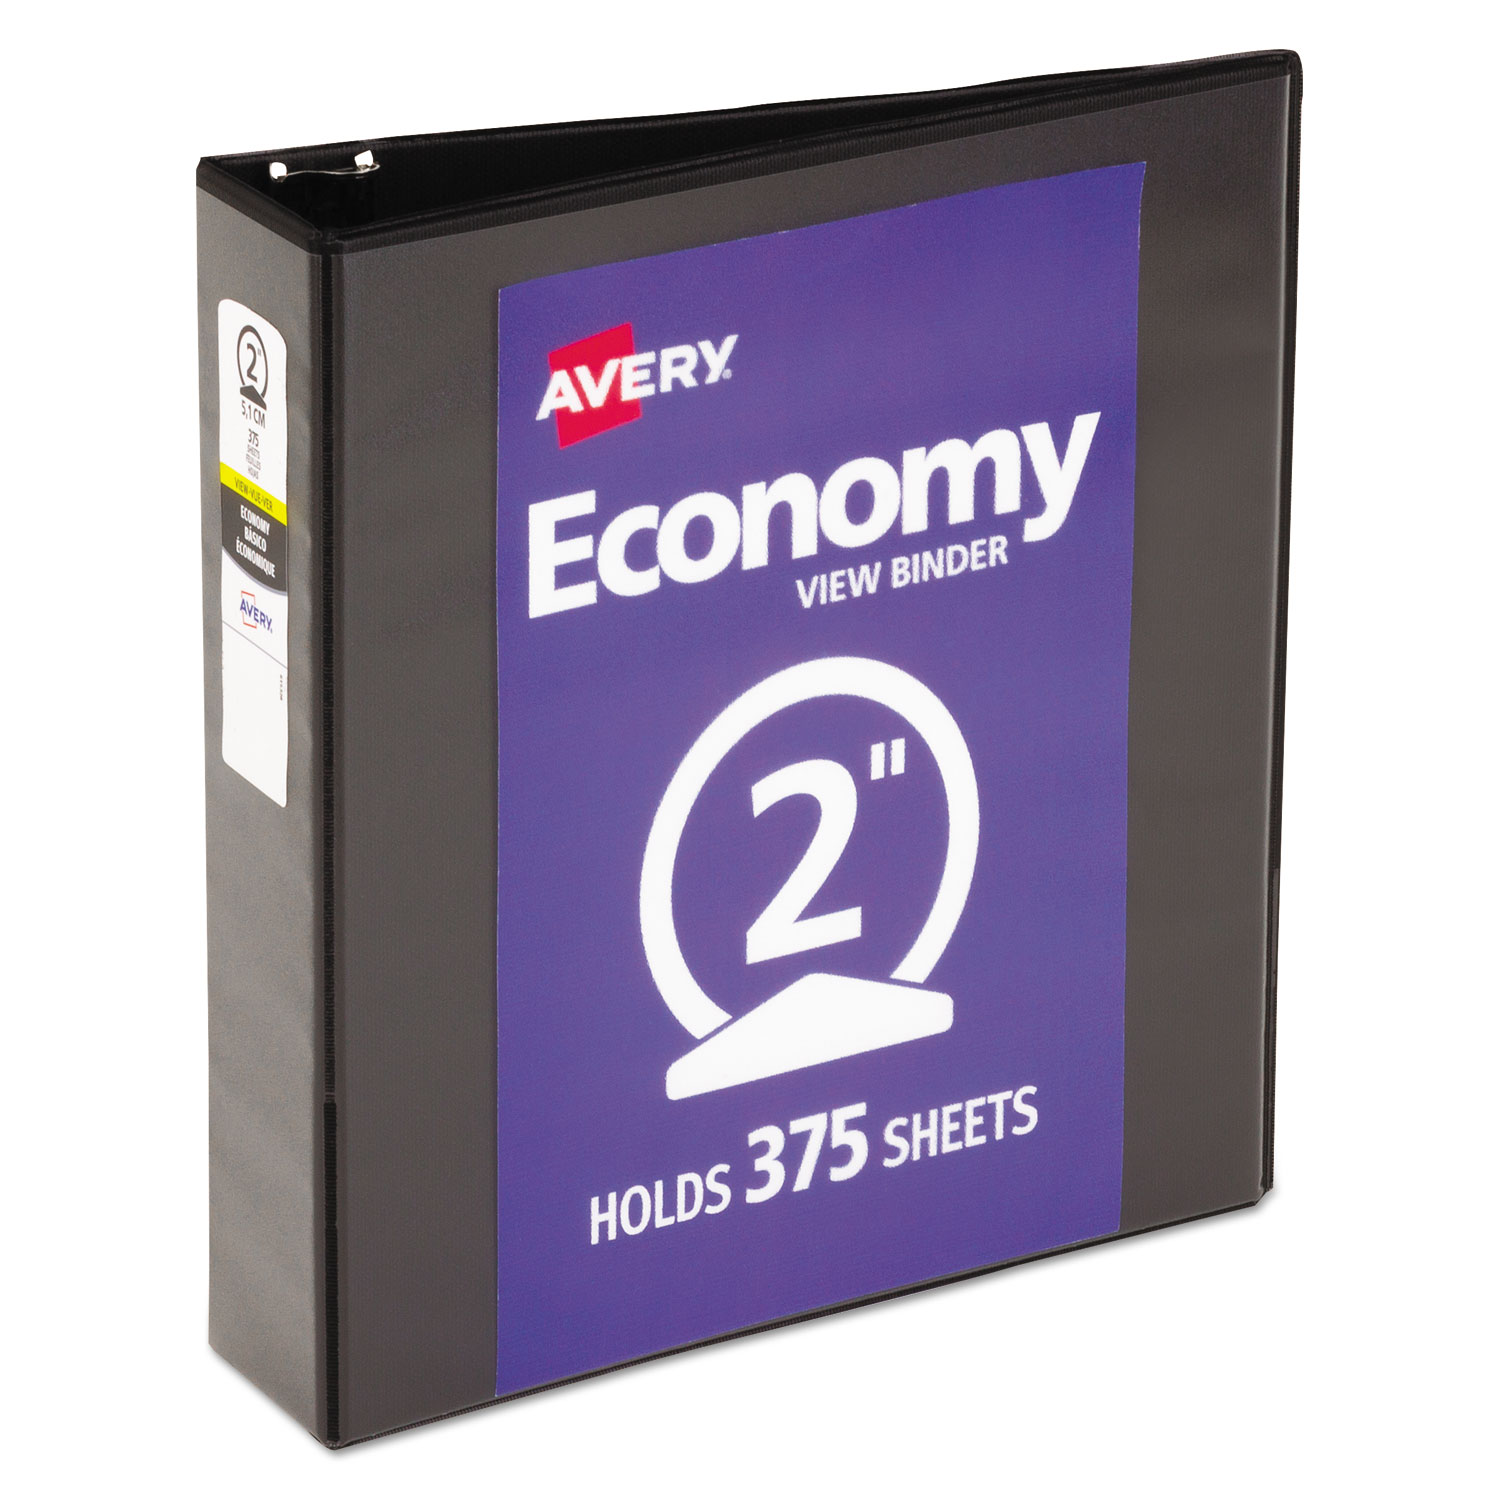  Avery 05730 Economy View Binder with Round Rings , 3 Rings, 2 Capacity, 11 x 8.5, Black (AVE05730) 